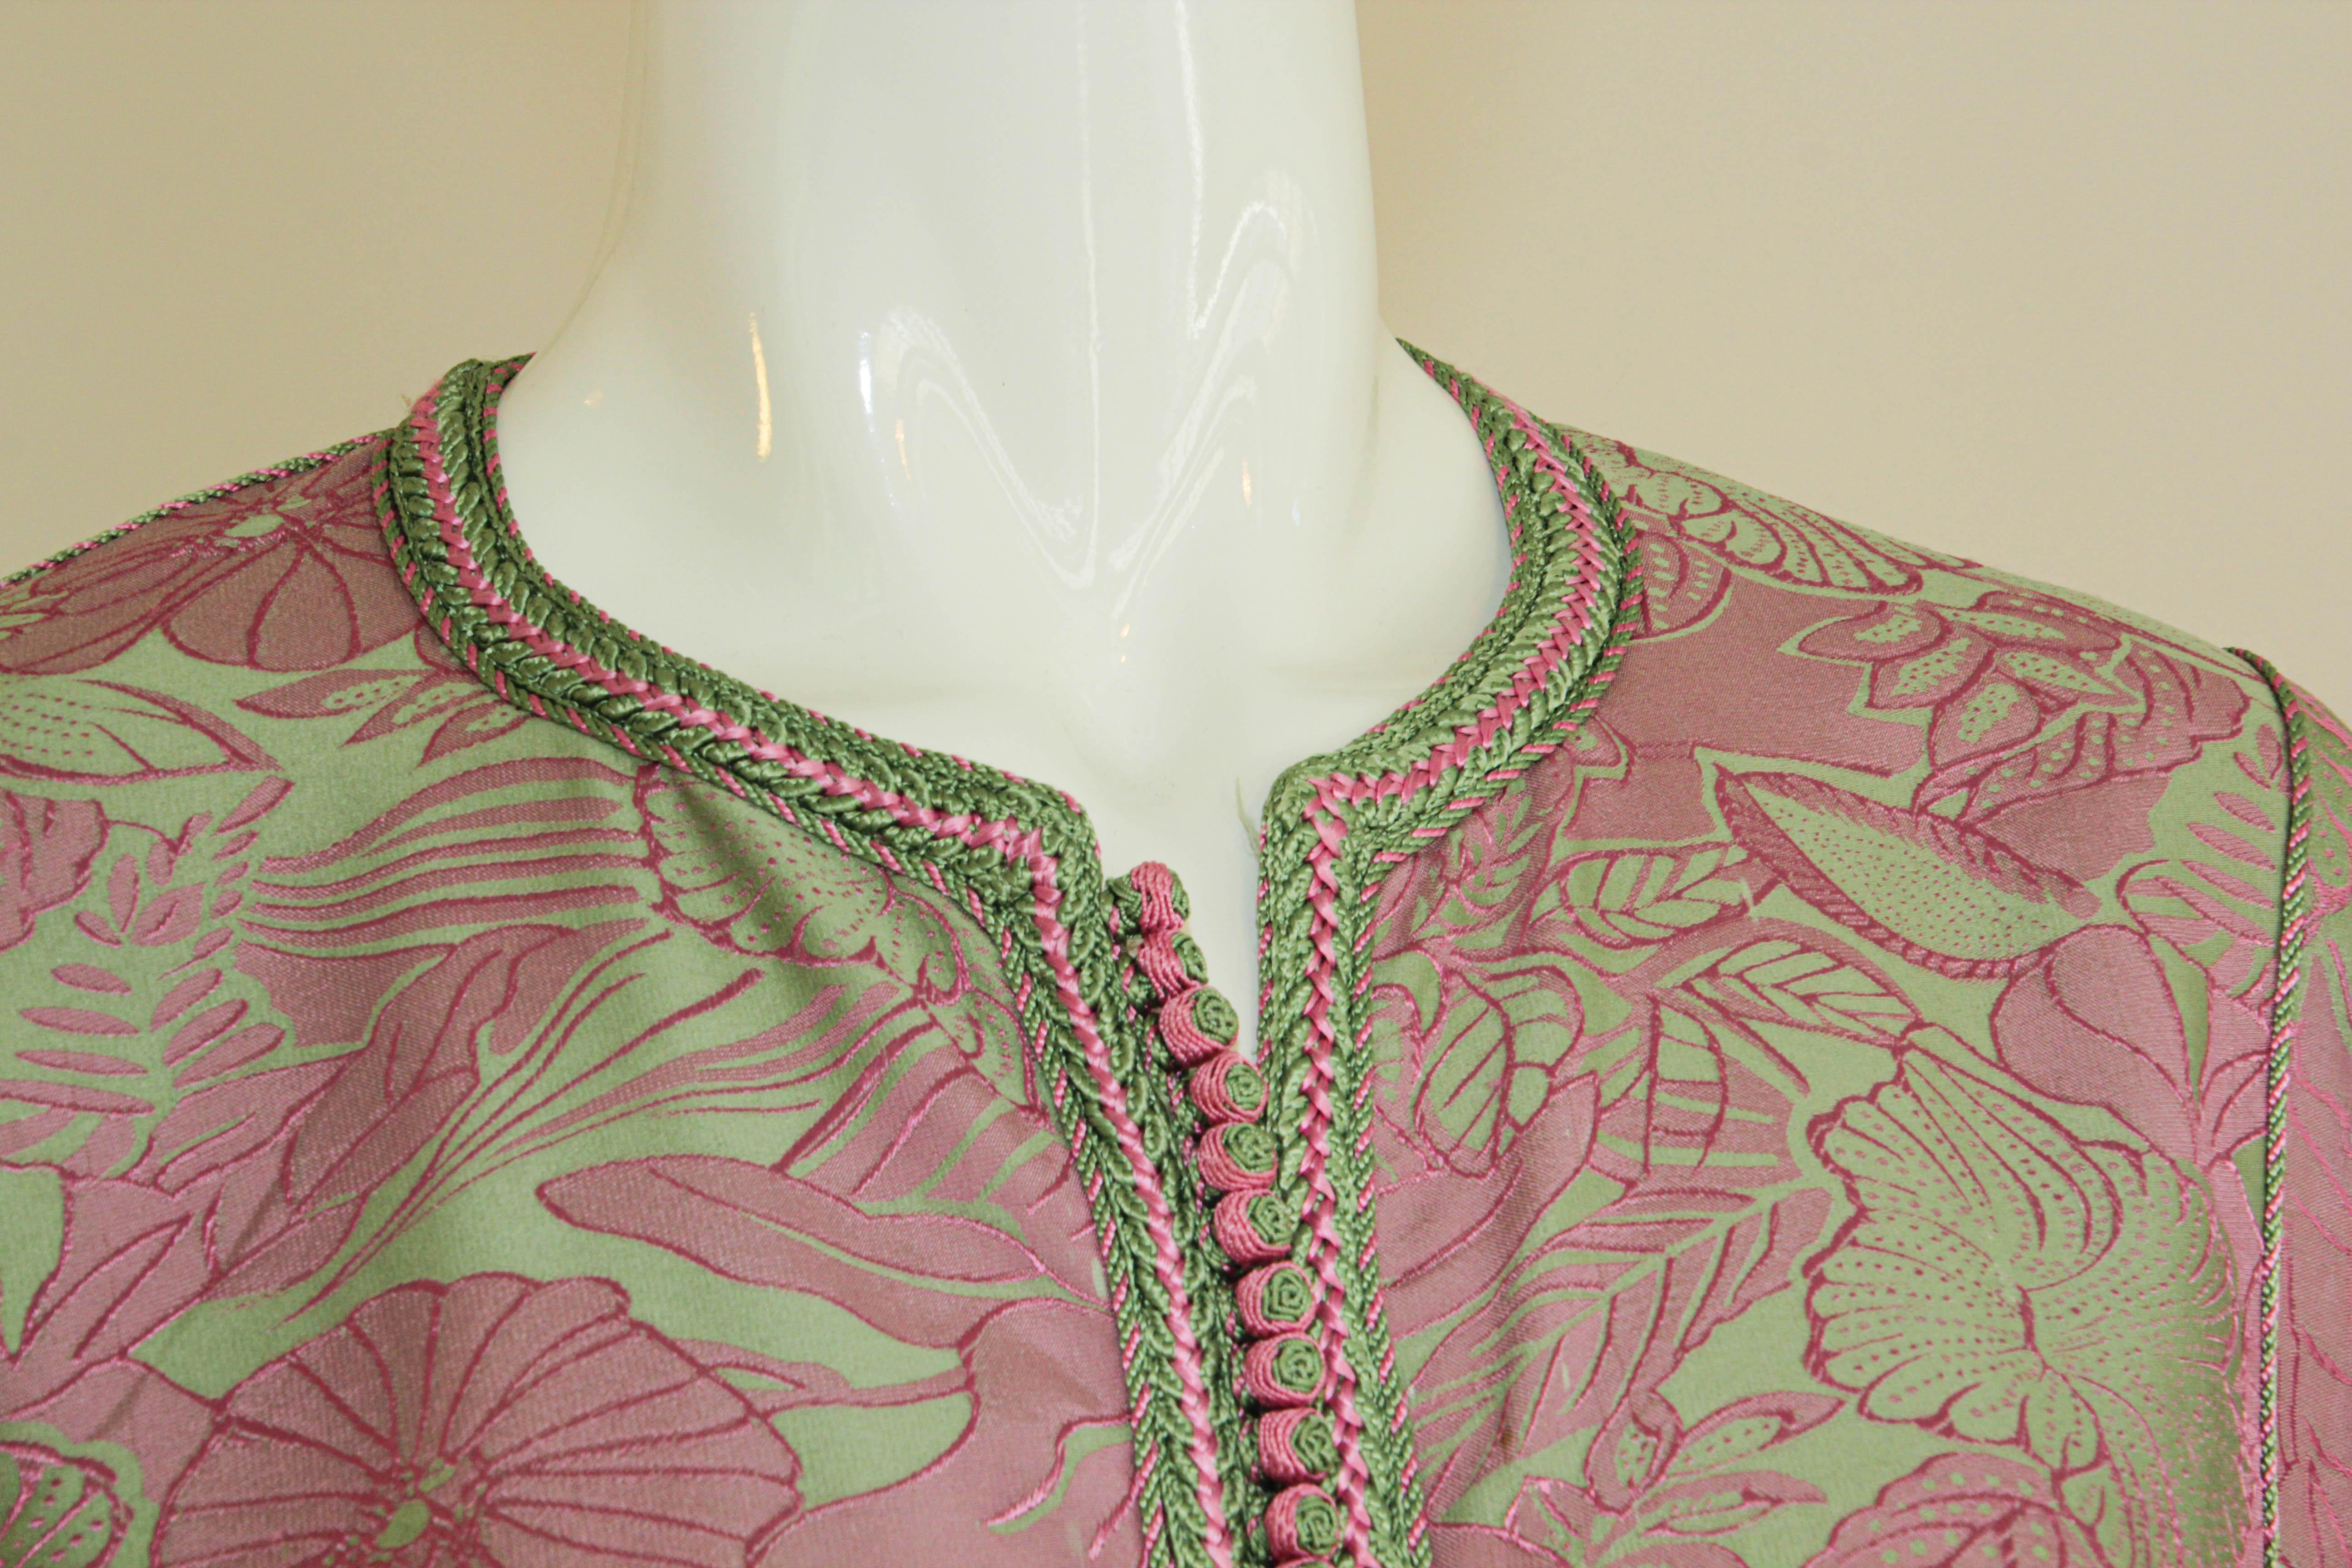 Moroccan Vintage Caftan Pink and Green Trim In Fair Condition For Sale In North Hollywood, CA